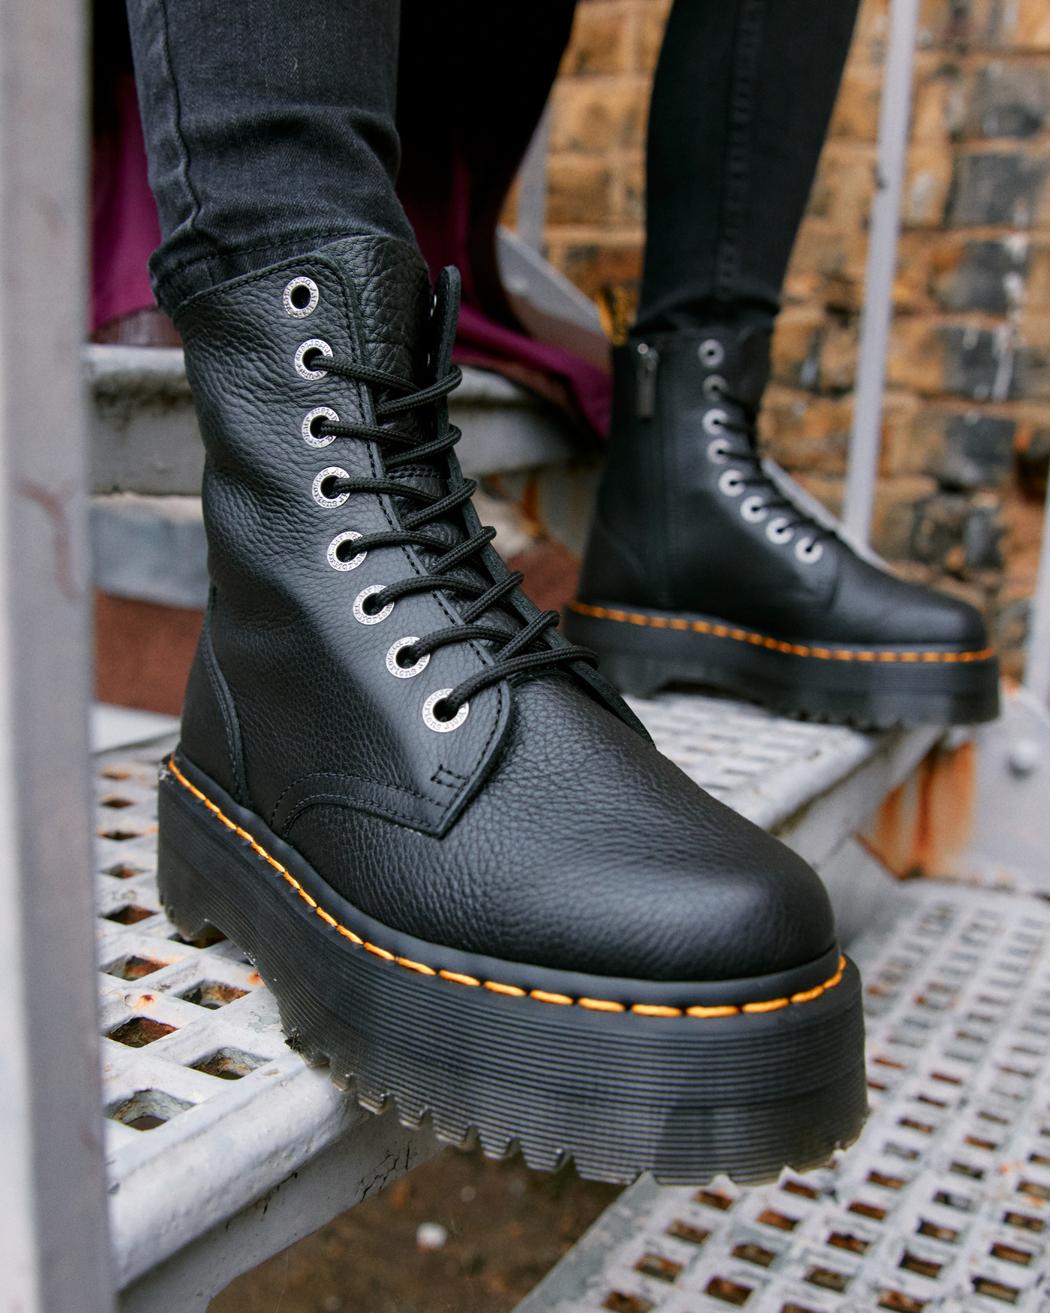 A mid-ankle height, laced, black leather platform boot.